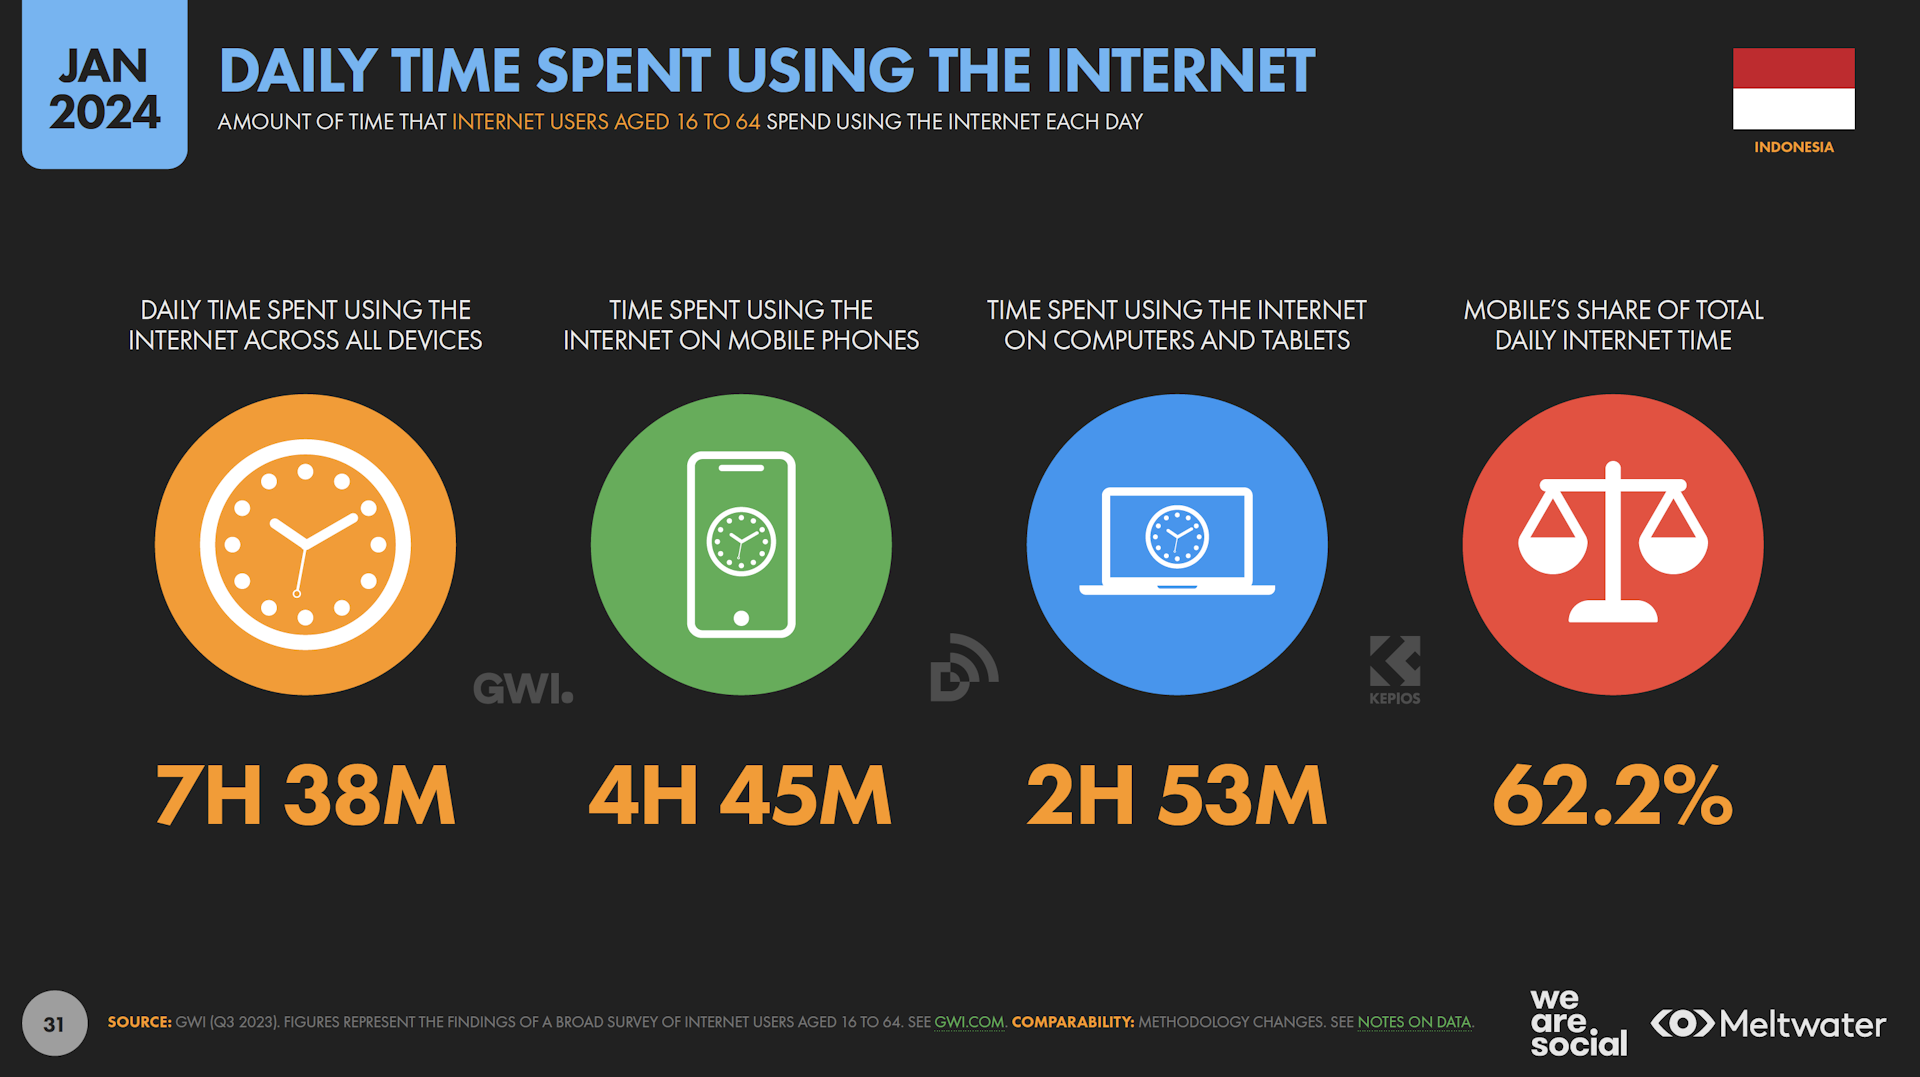 Daily time spent using the internet based on Global Digital Report 2024 for Indonesia